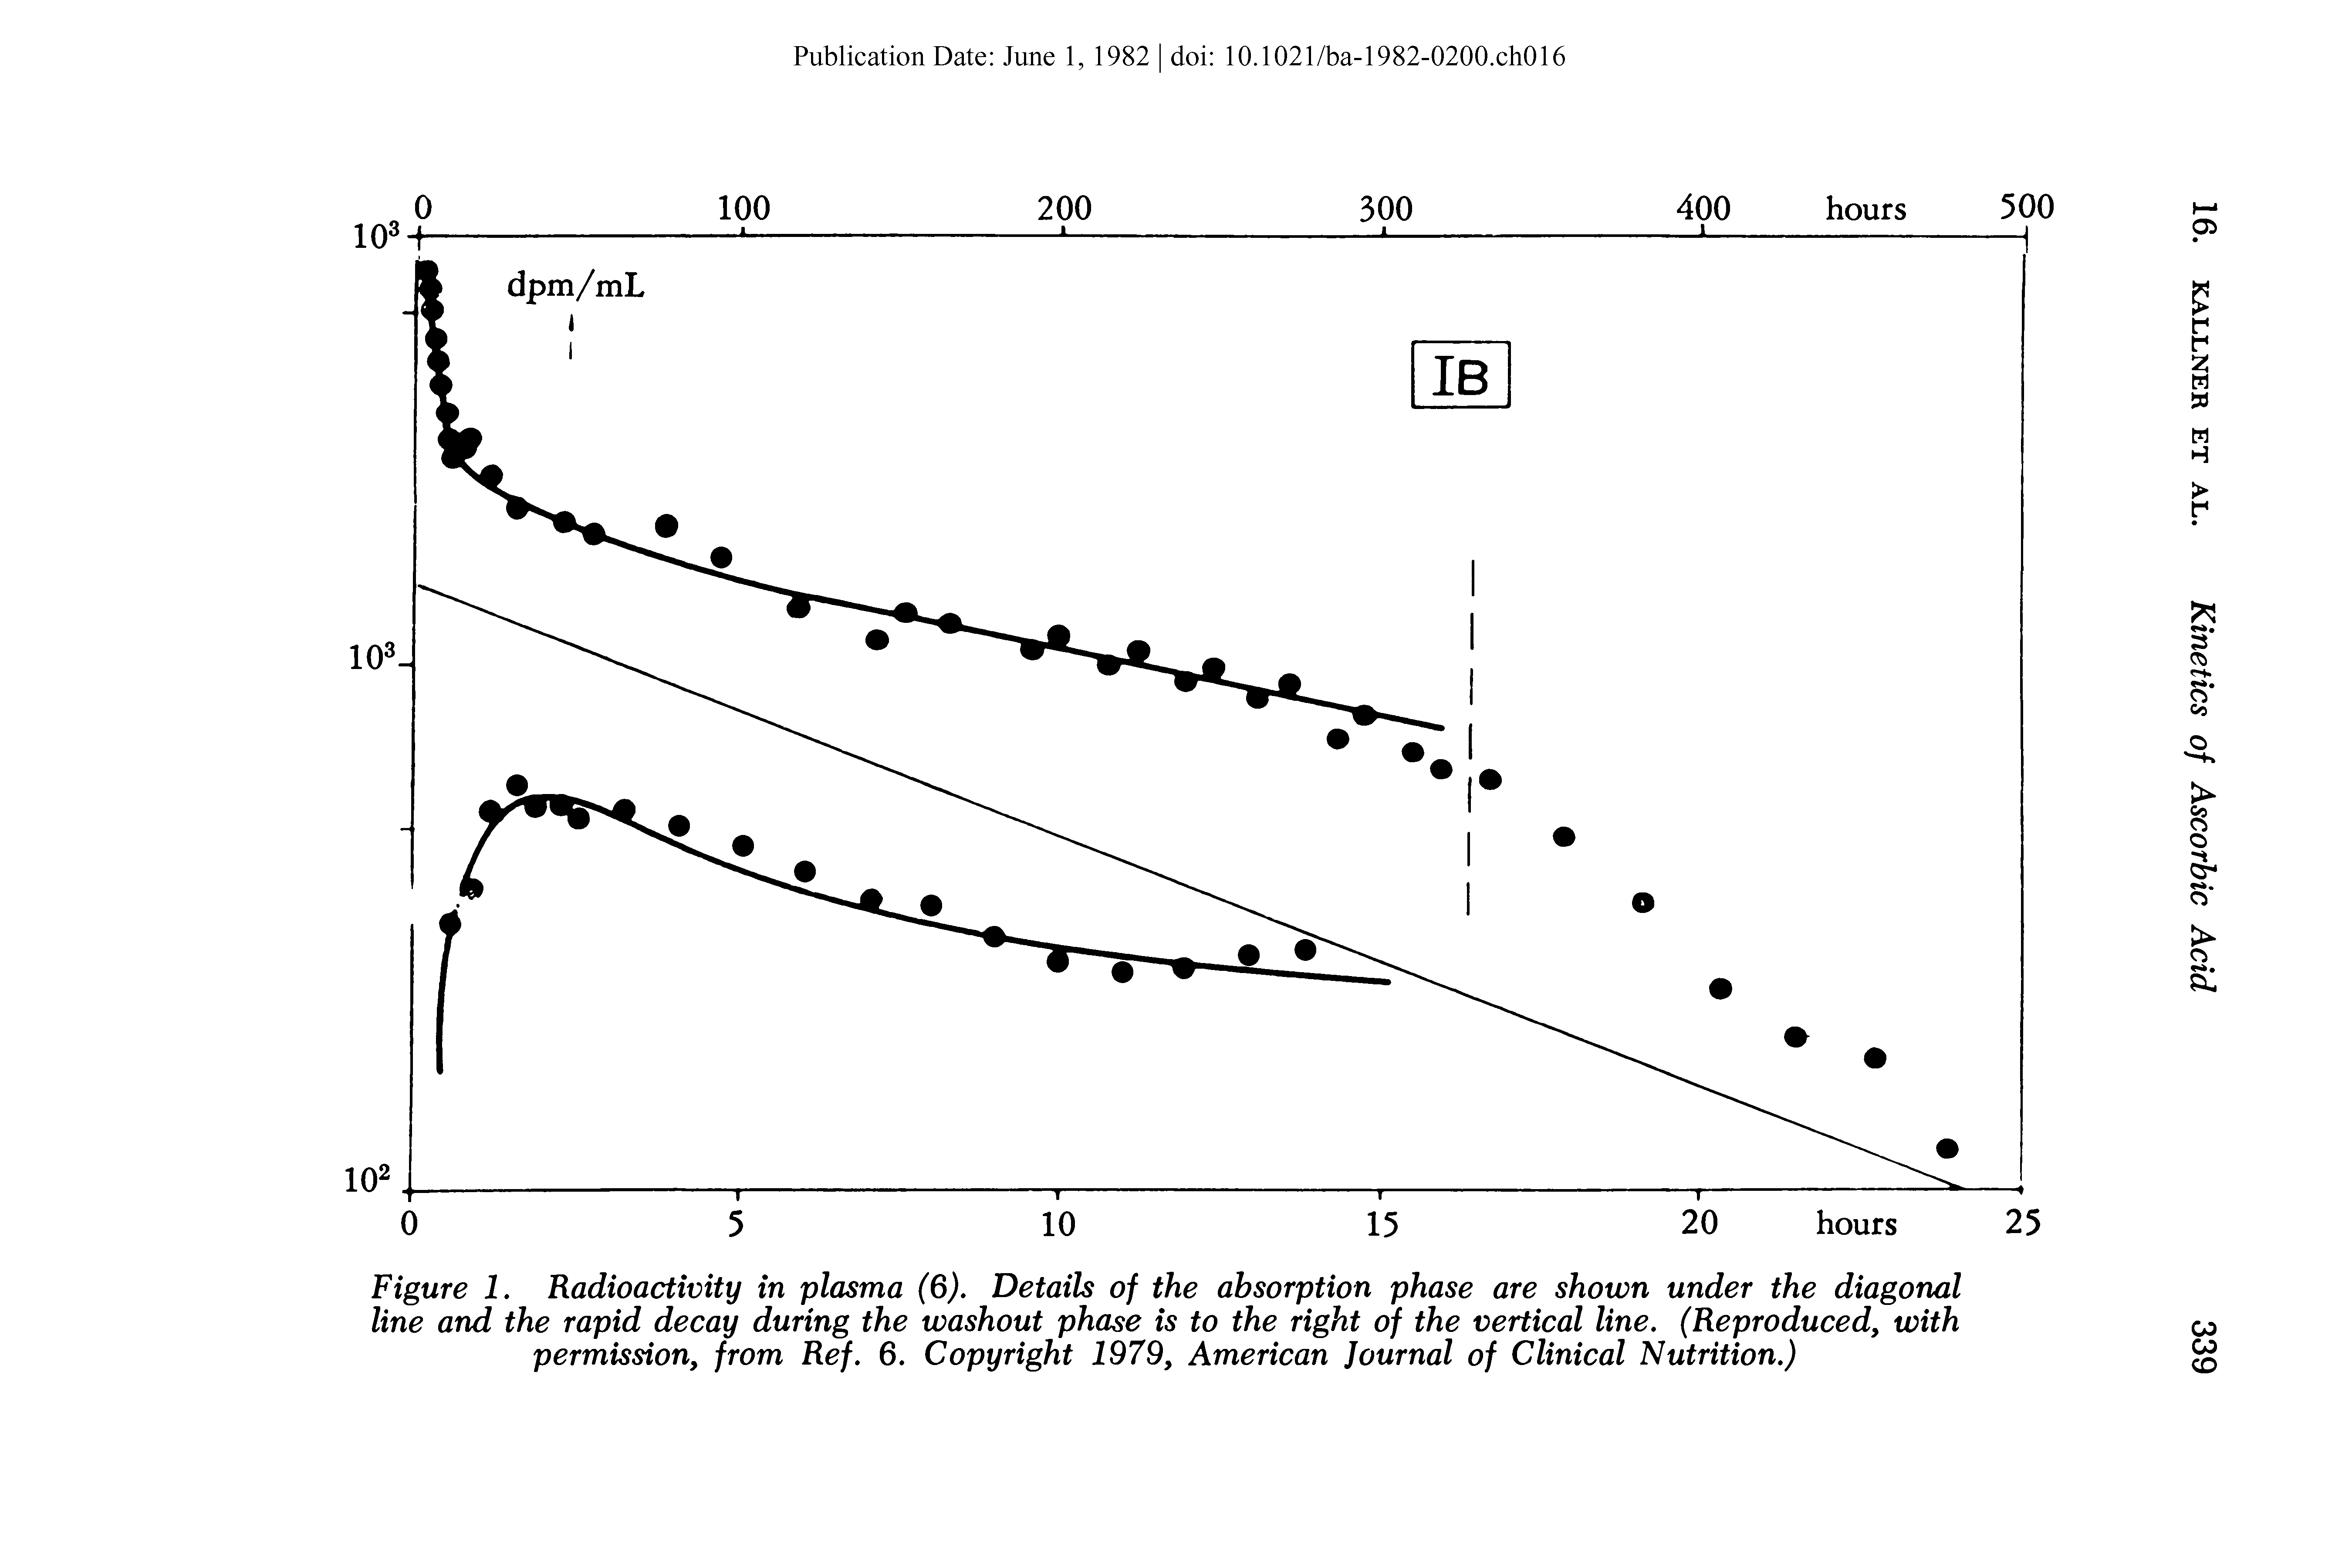 Figure 1. Radioactivity in plasma (6), Details of the absorption phase are shown under the diagonal line and the rapid decay during the washout phase is to the right of the vertical line. (Reproduced, with permission, from Ref. 6. Copyright 1979, American Journal of Clinical Nutrition.)...